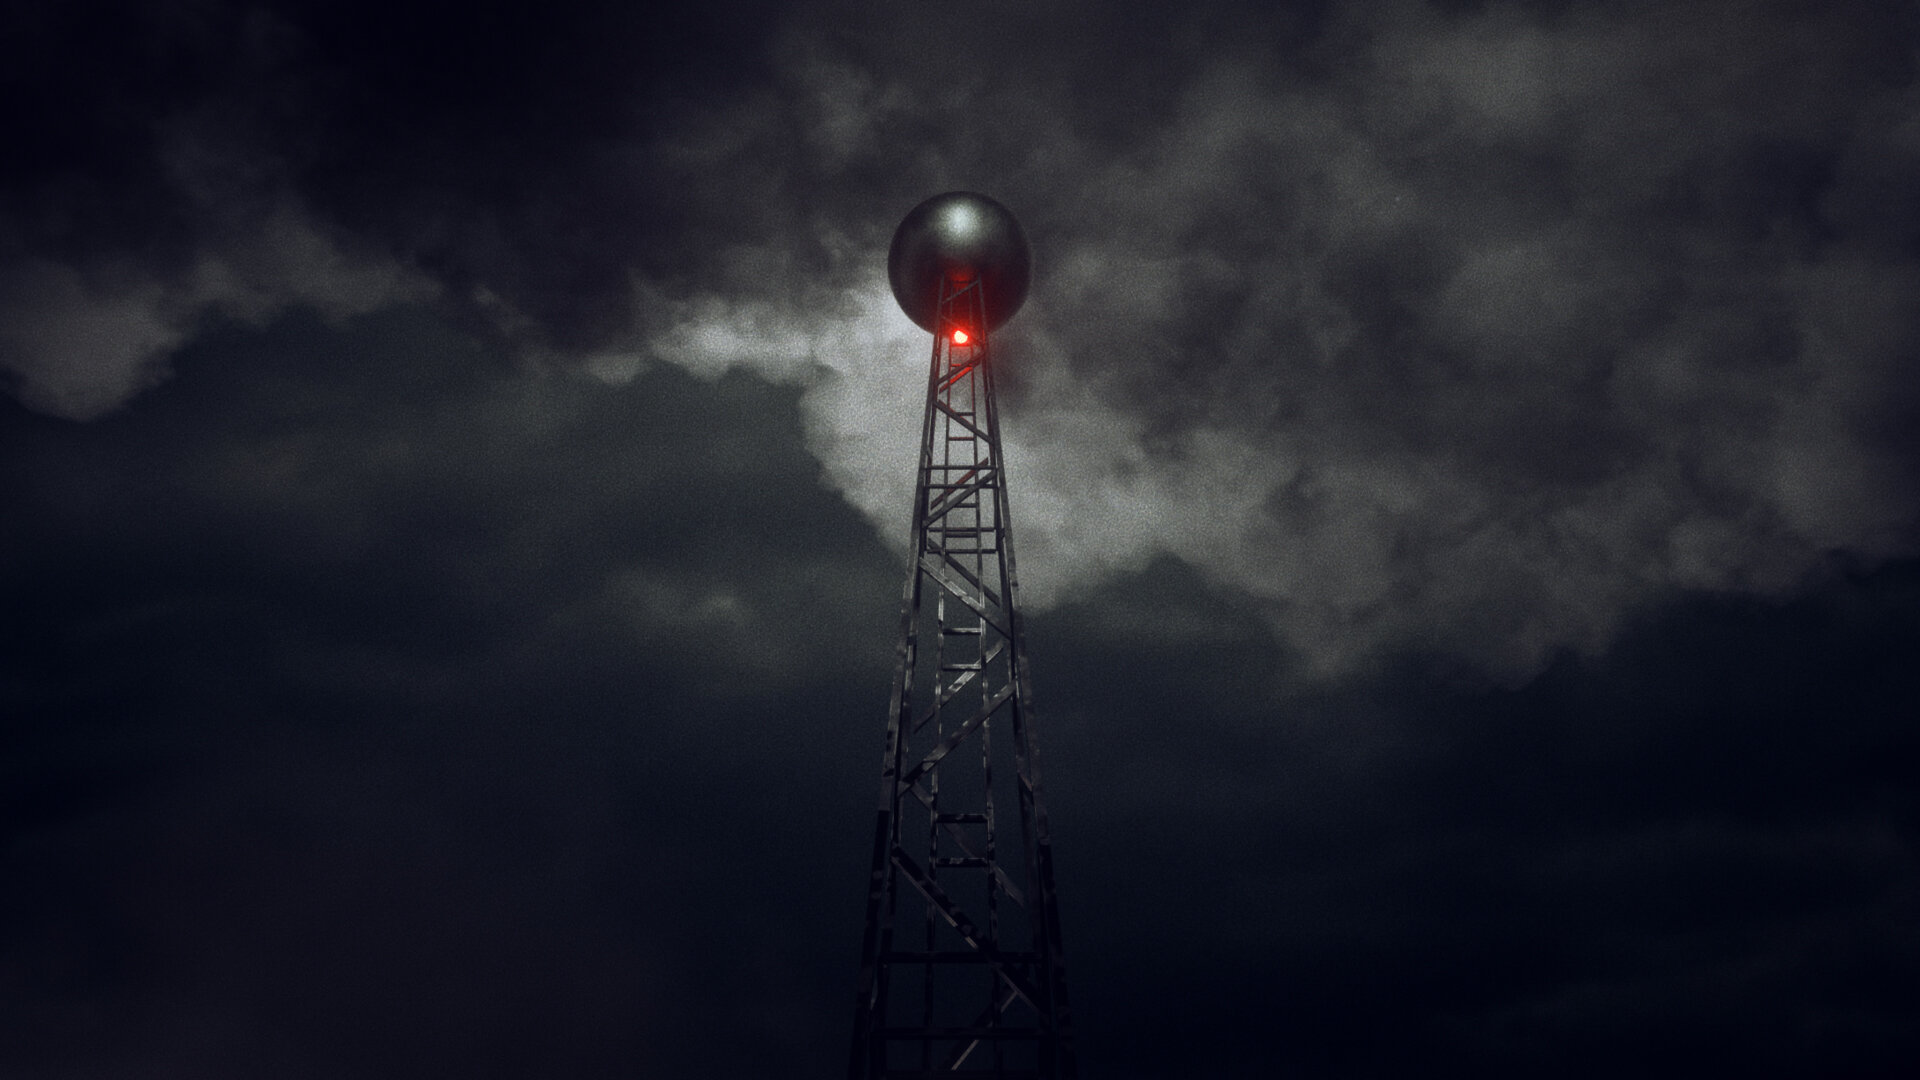 radio mast with red light at top